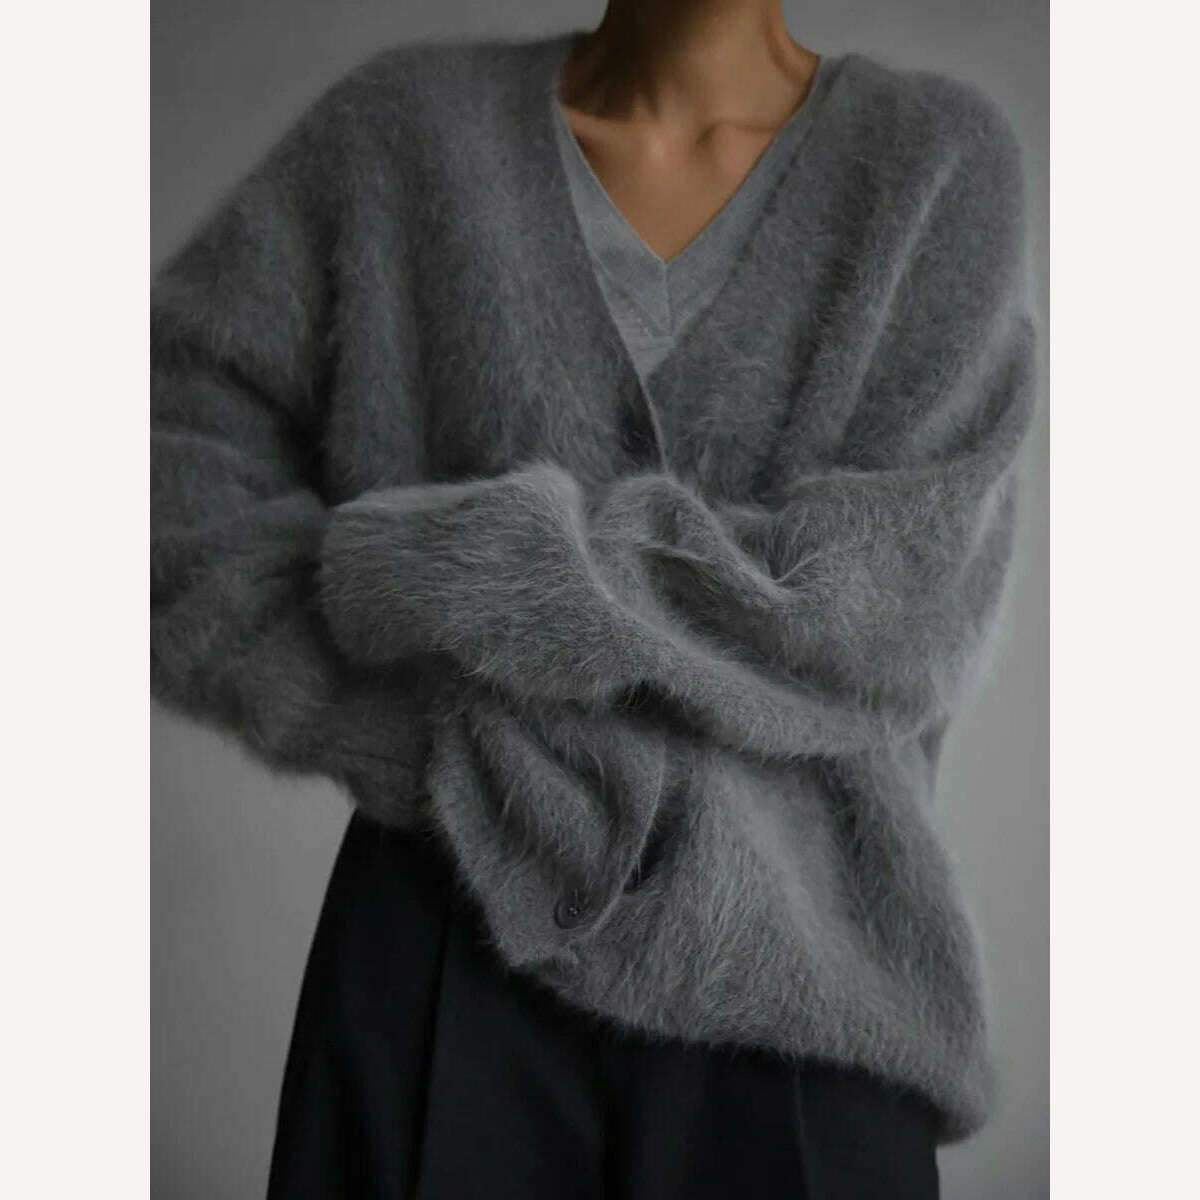 KIMLUD, Fluffy Mohair Cardigan For Women V-Neck Button Up Oversize Cardigan Sweater Autumn Winter Warm Knitted Outerwear, KIMLUD Womens Clothes